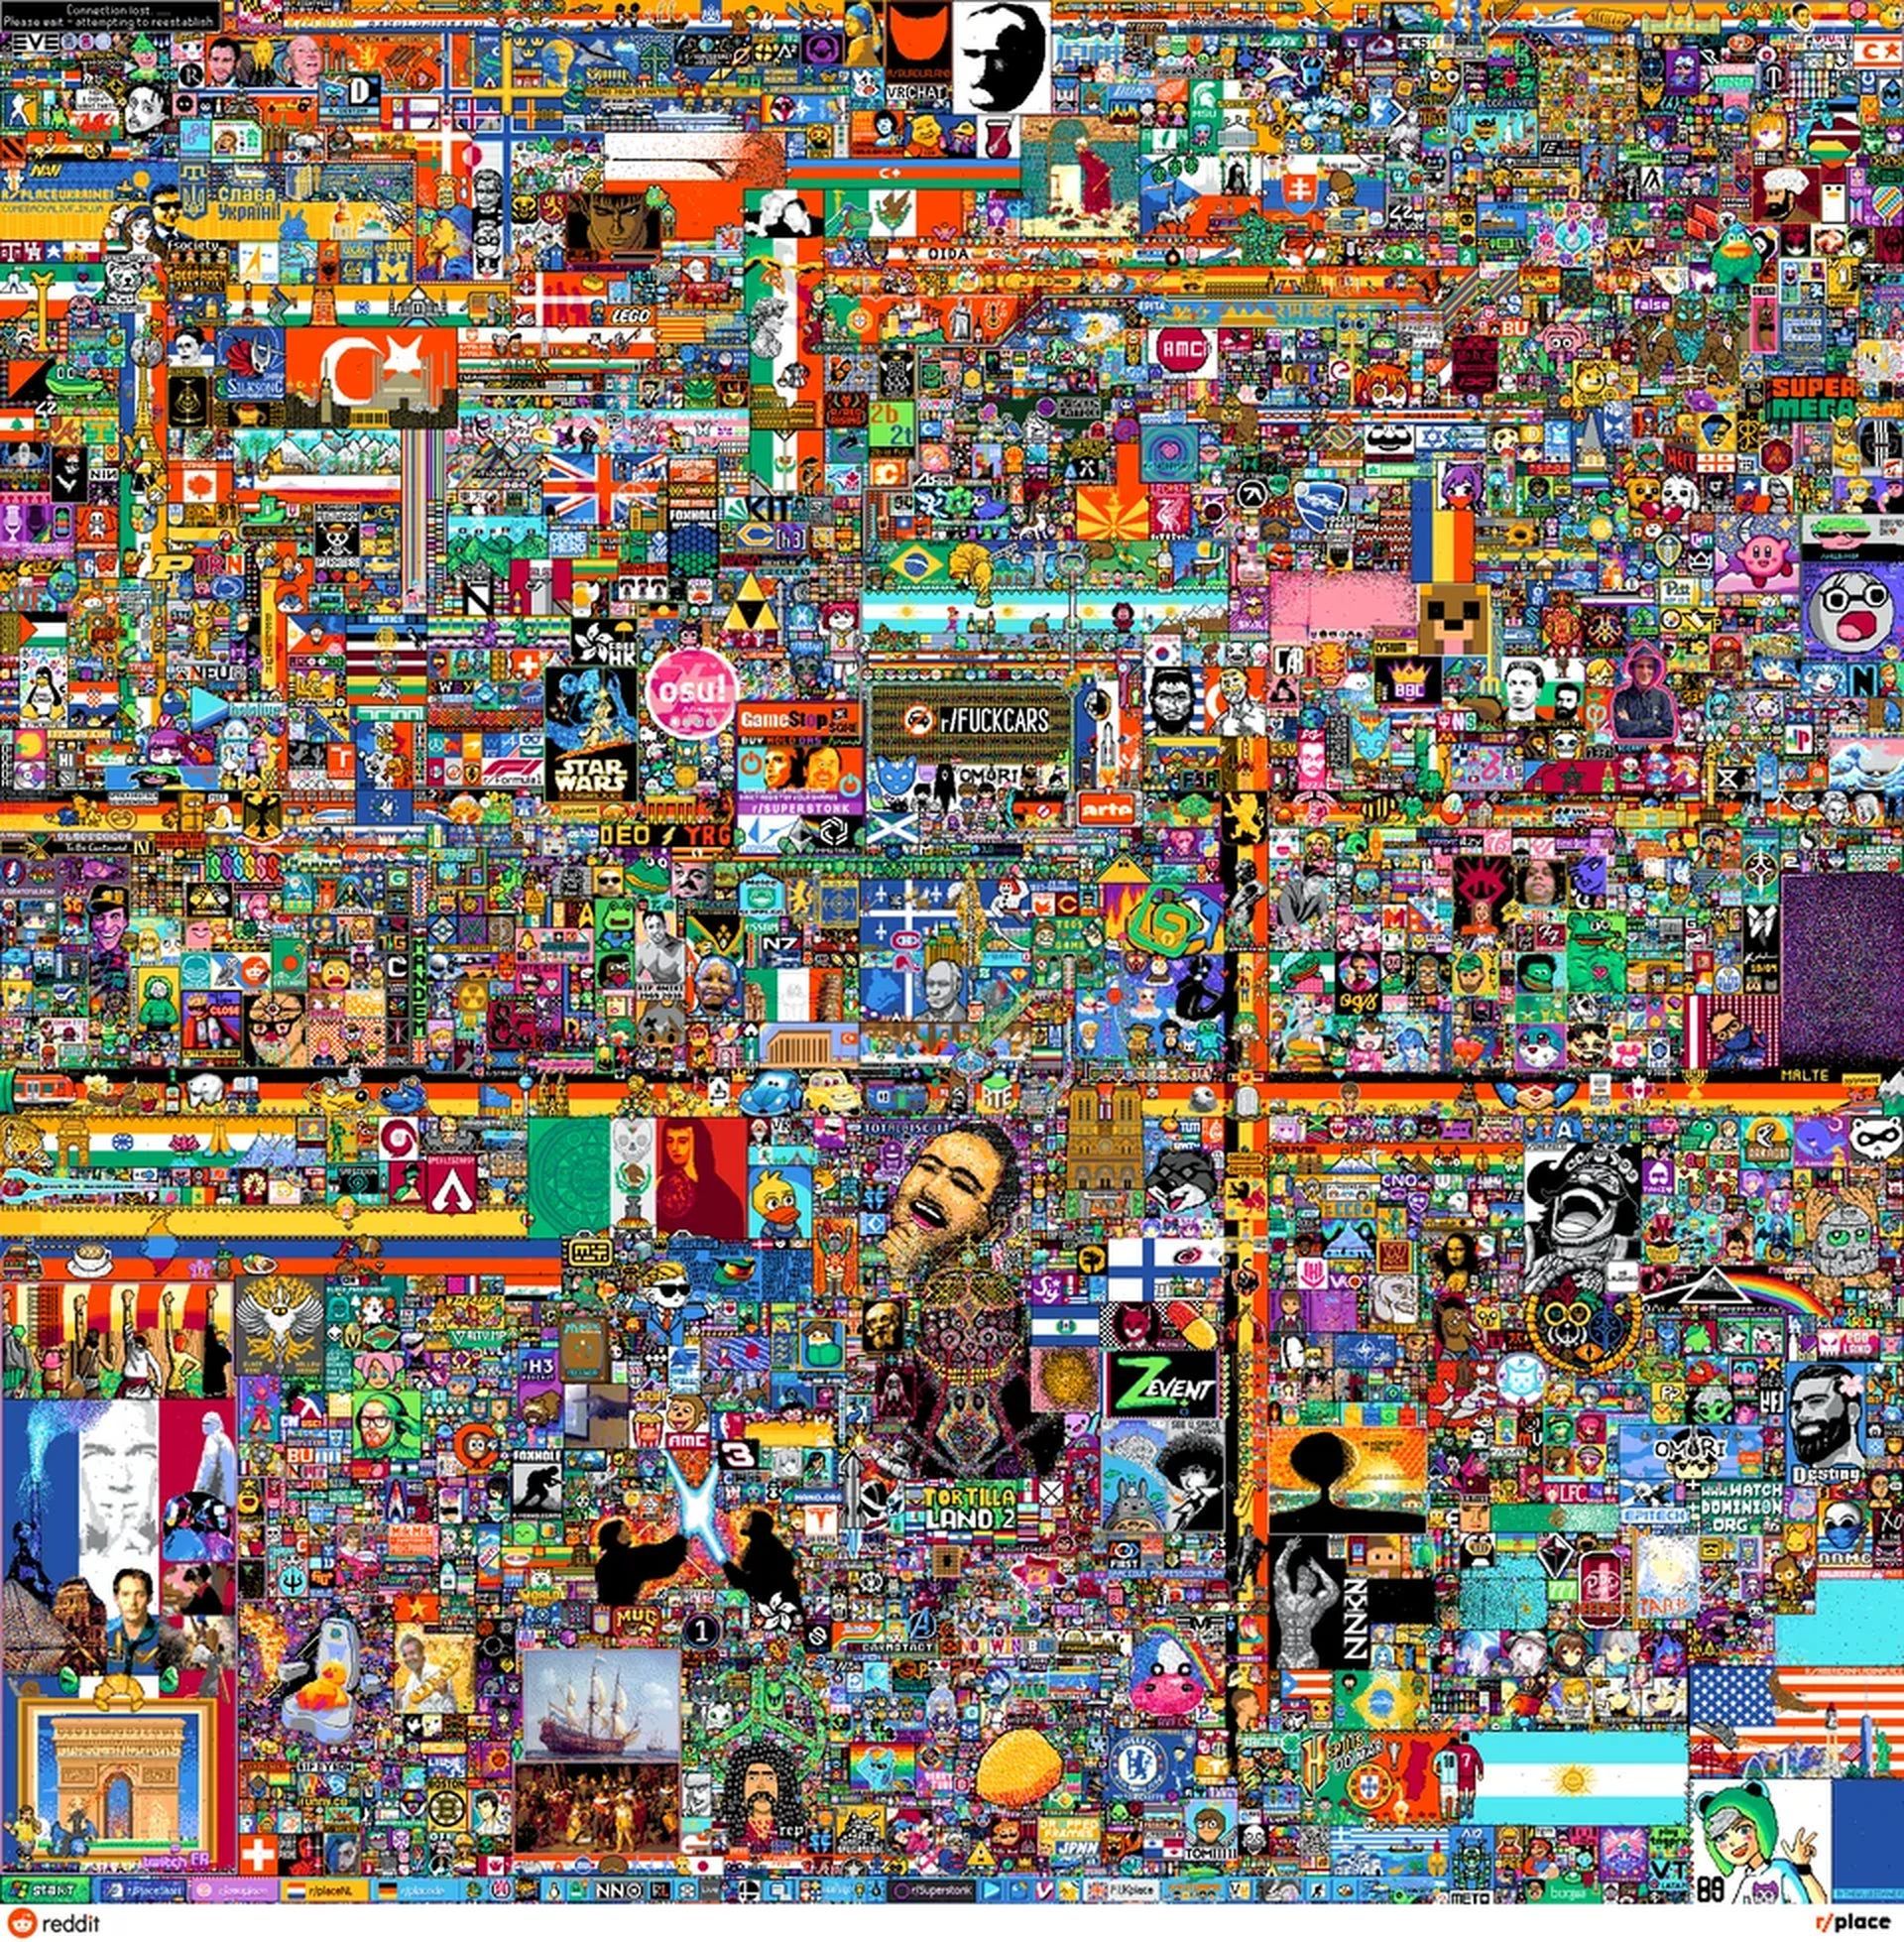 One Piece has 4 things on the map rn : r/place